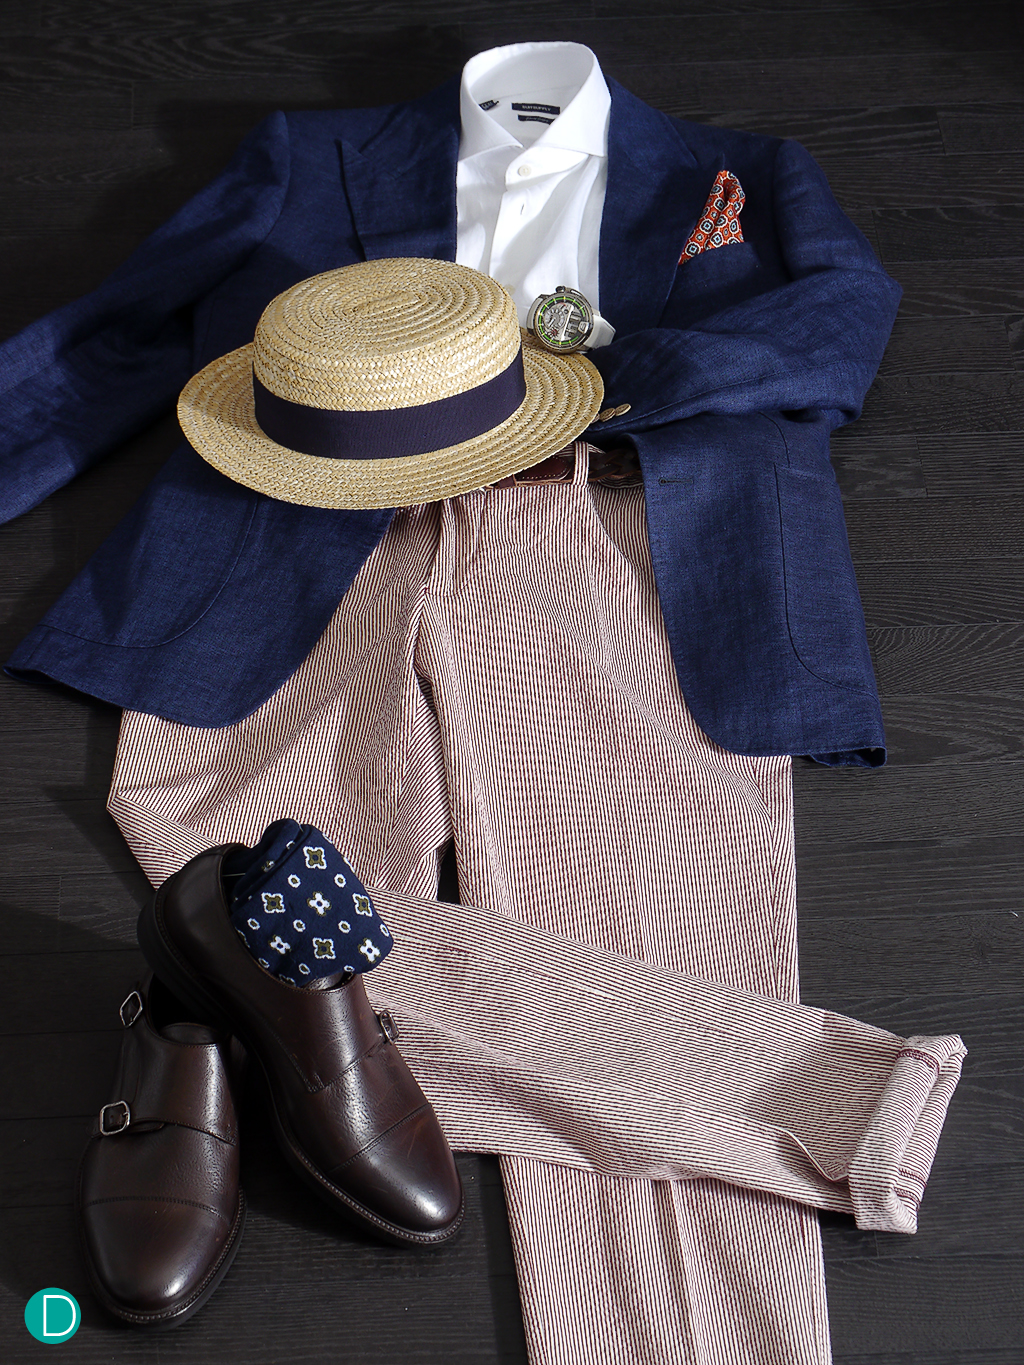 This ensemble is decidedly casual, with linen coat, linen shirt, and seersucker trousers, and even a boater hat. The watch is the iconic and nautically flavoured HYT H1 Titanium with a gorgeous white strap.